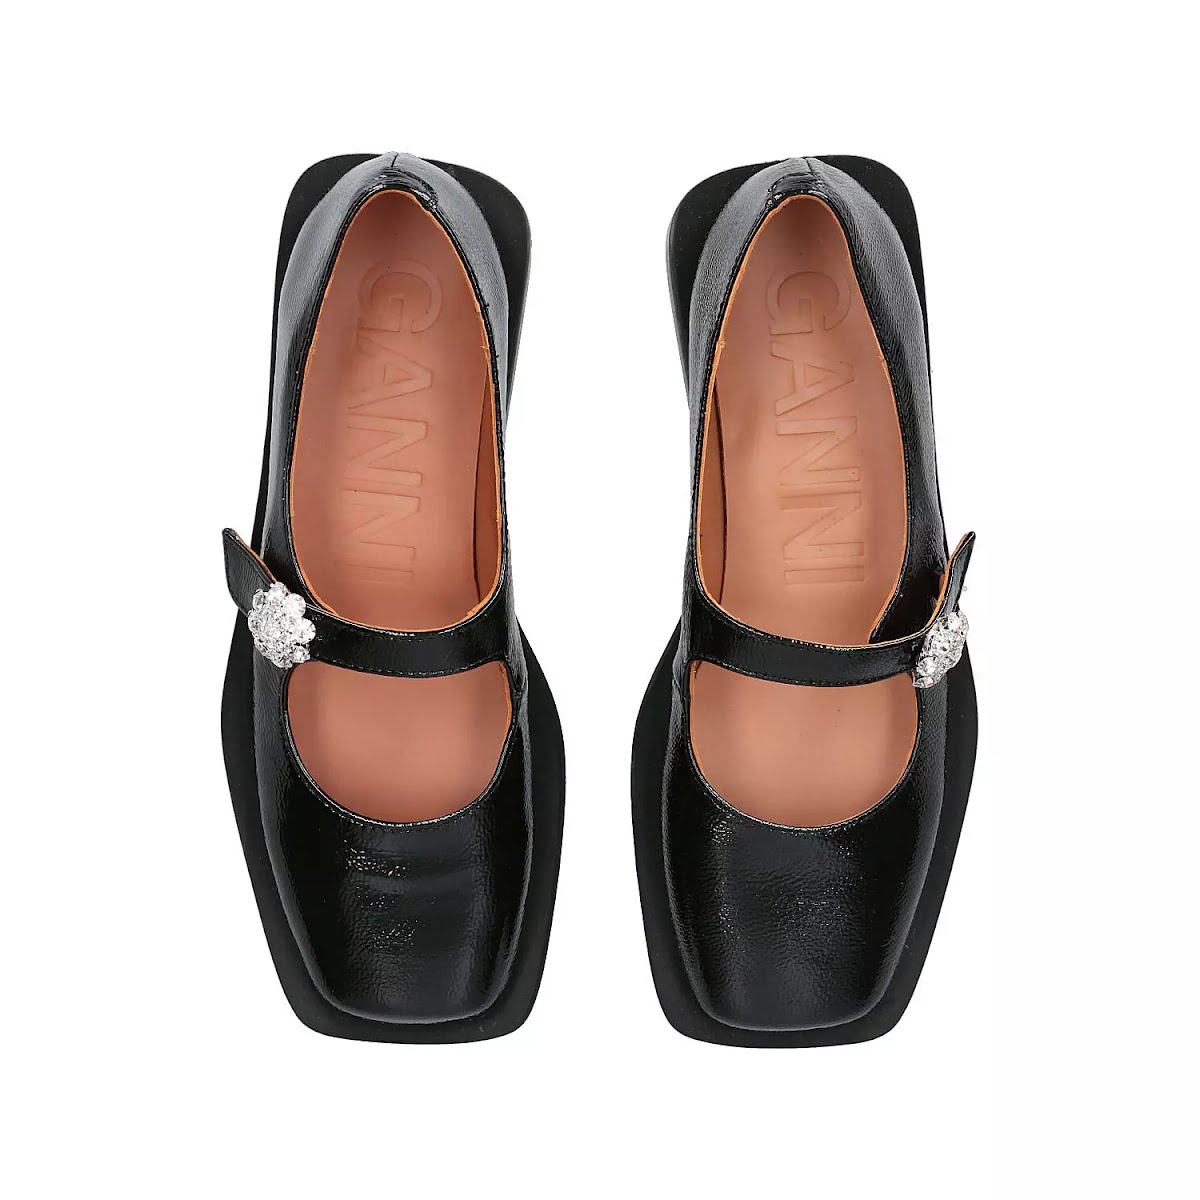 GANNI Wide Welt Mary-Jane Shoes, €295, Brown Thomas